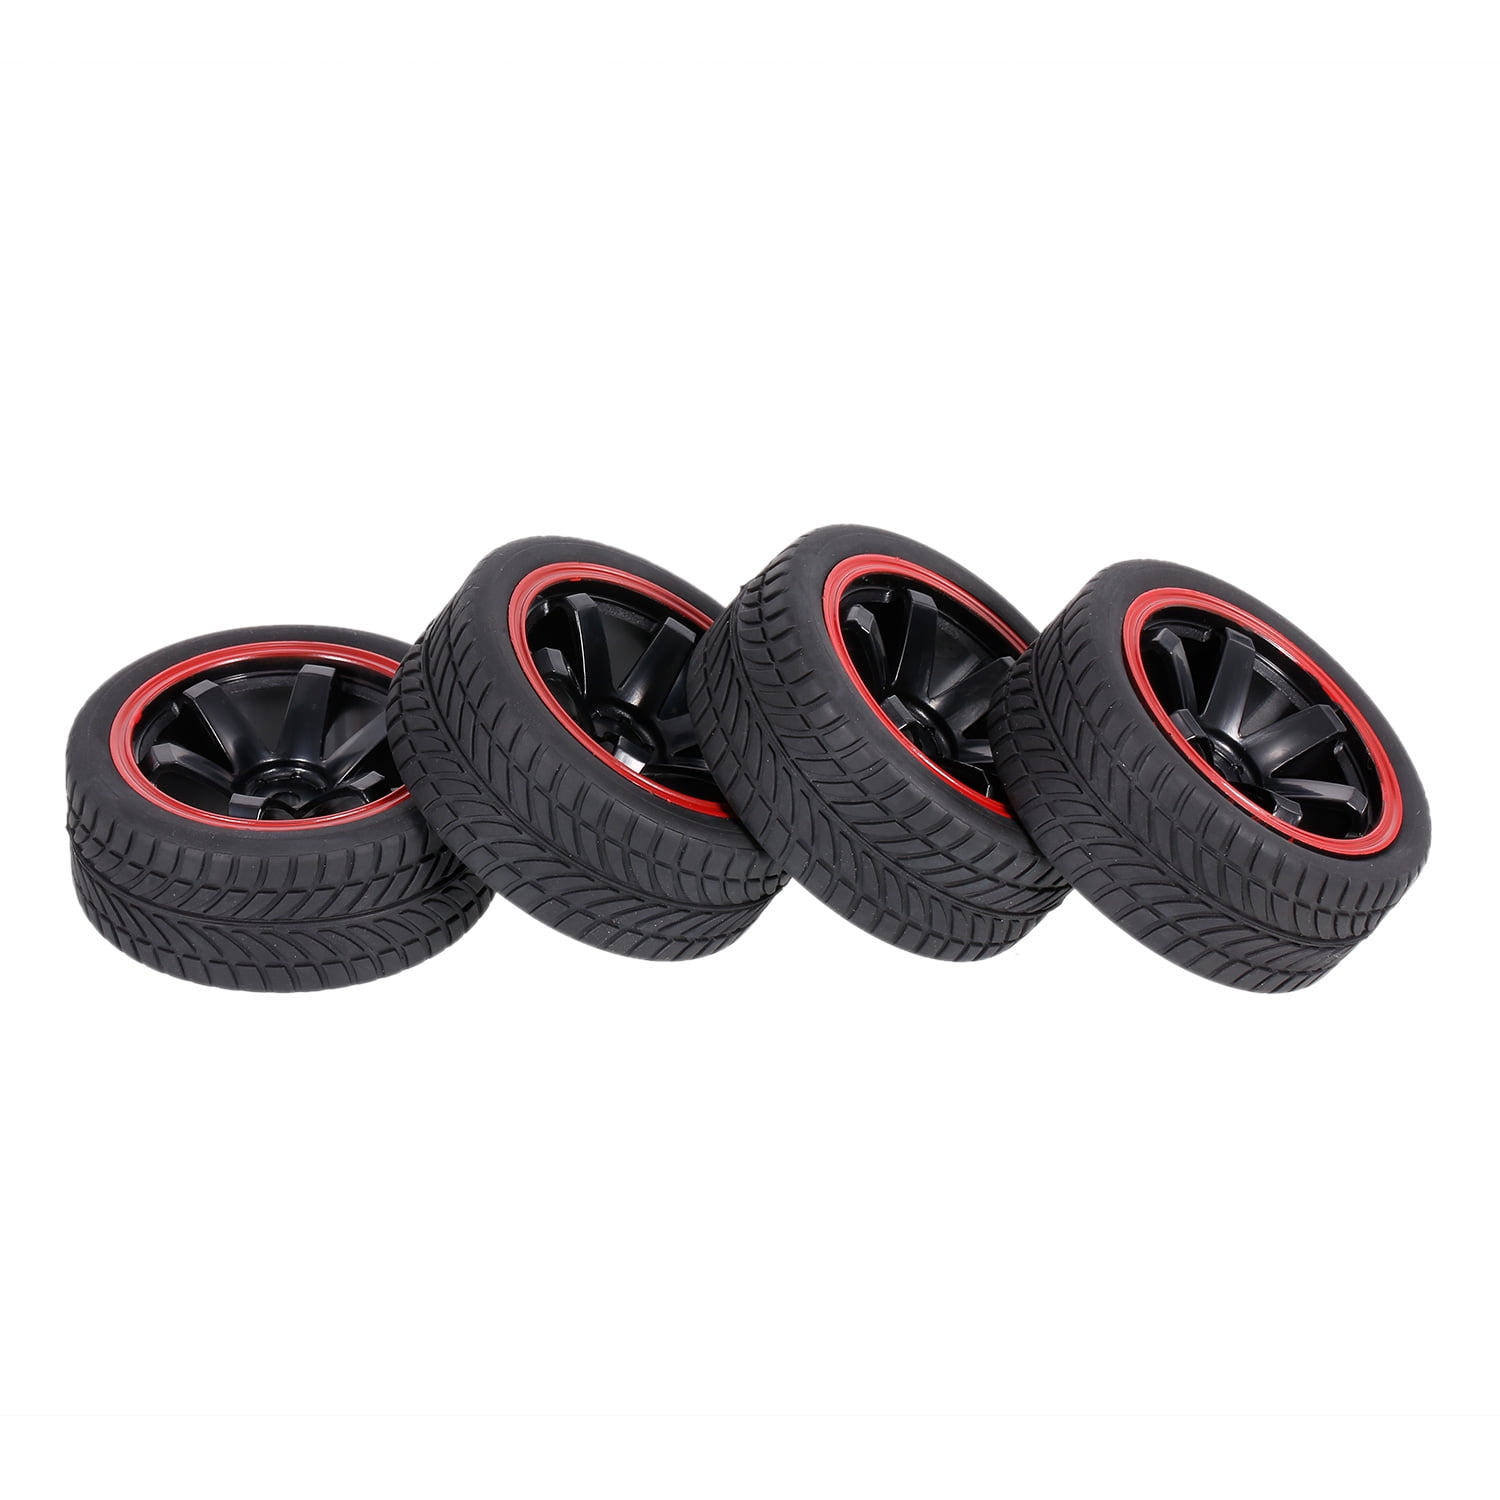 D DOLITY 4 Pieces Rubber RC Racing Cars Tires for 1/10 Hsp Redcat Traxxas Hpi Truck 